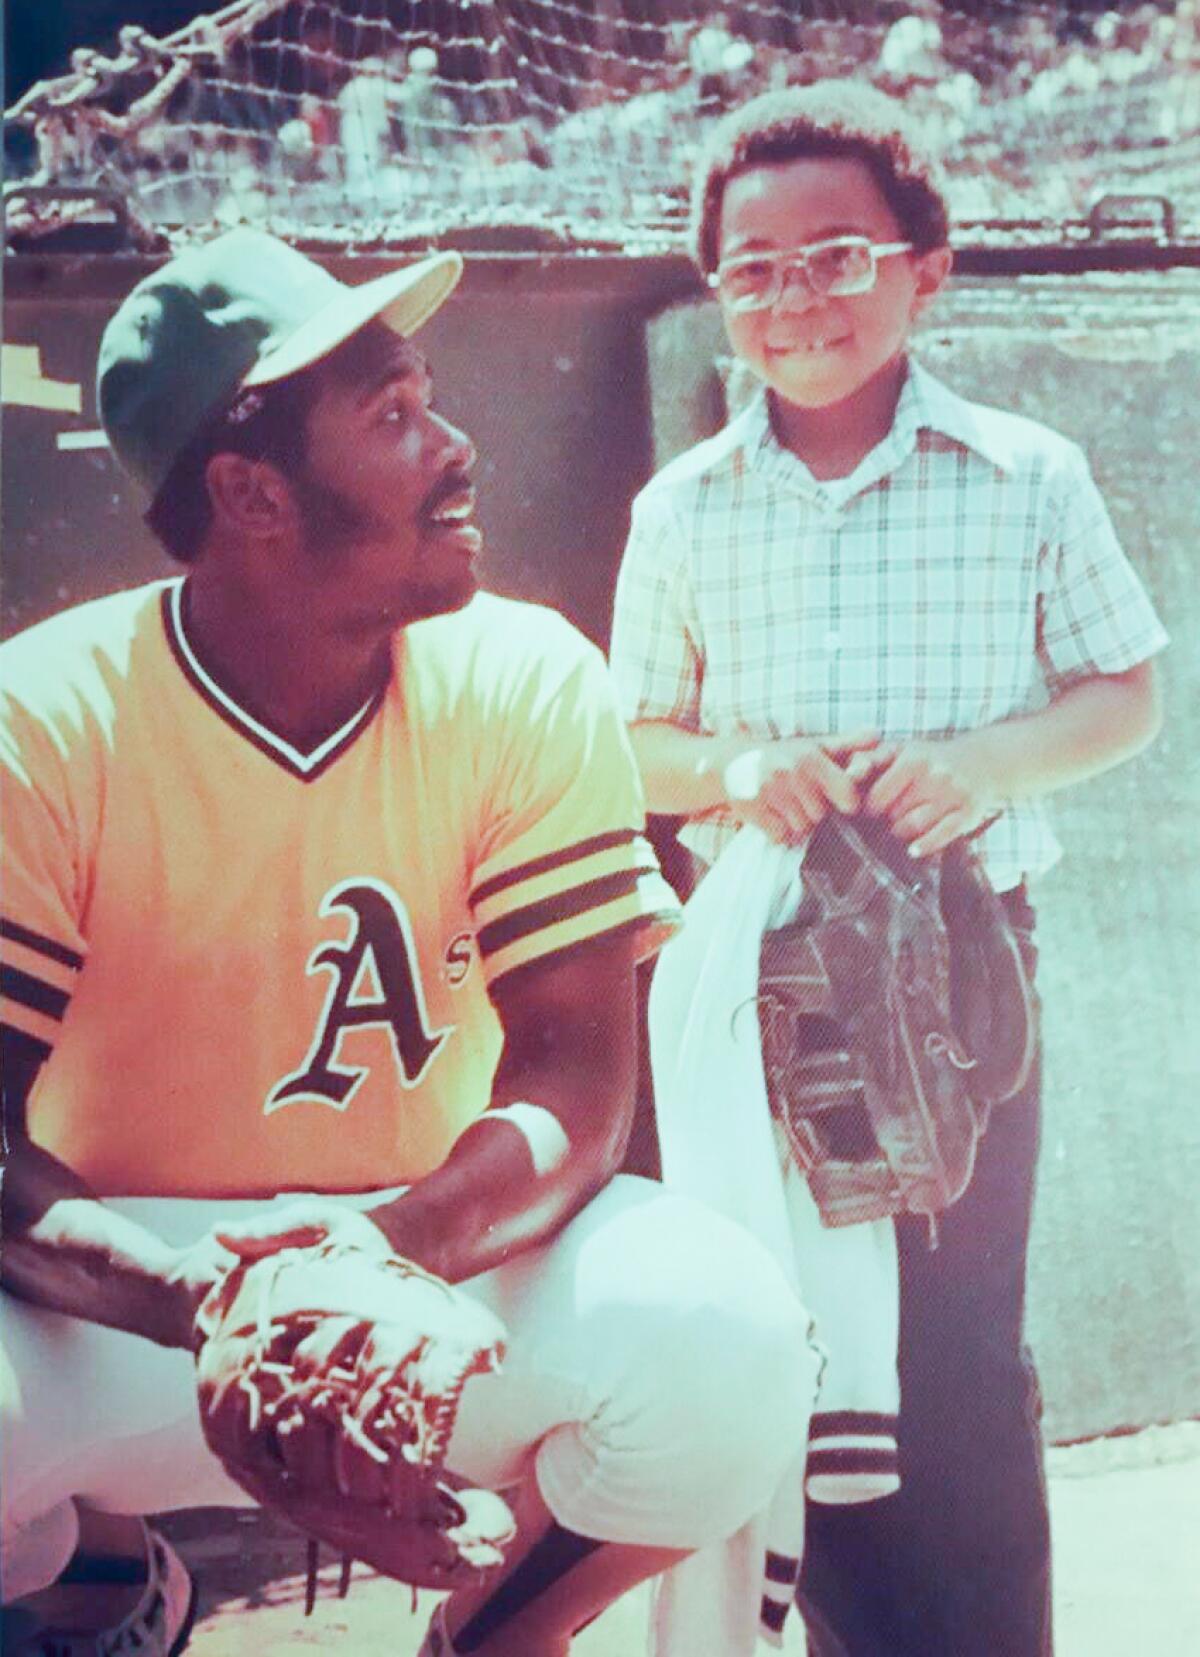 Derrick Blue, right, with his father, former Oakland Athletics pitcher Vida Blue